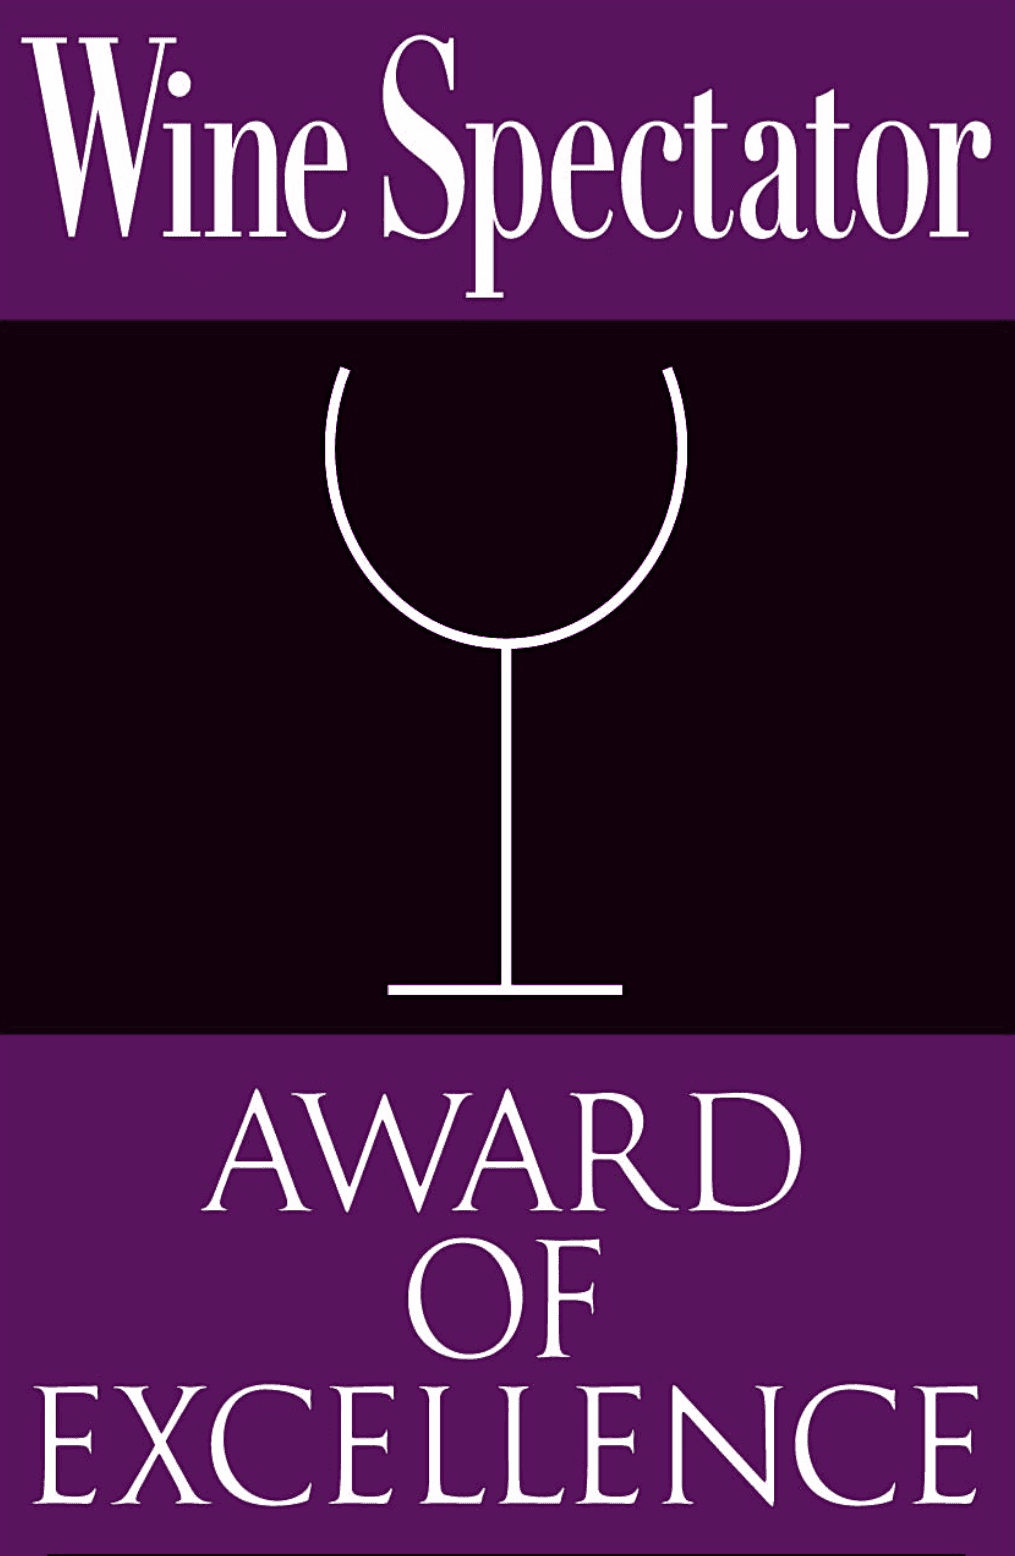 Award of Excellence from Wine Spectator